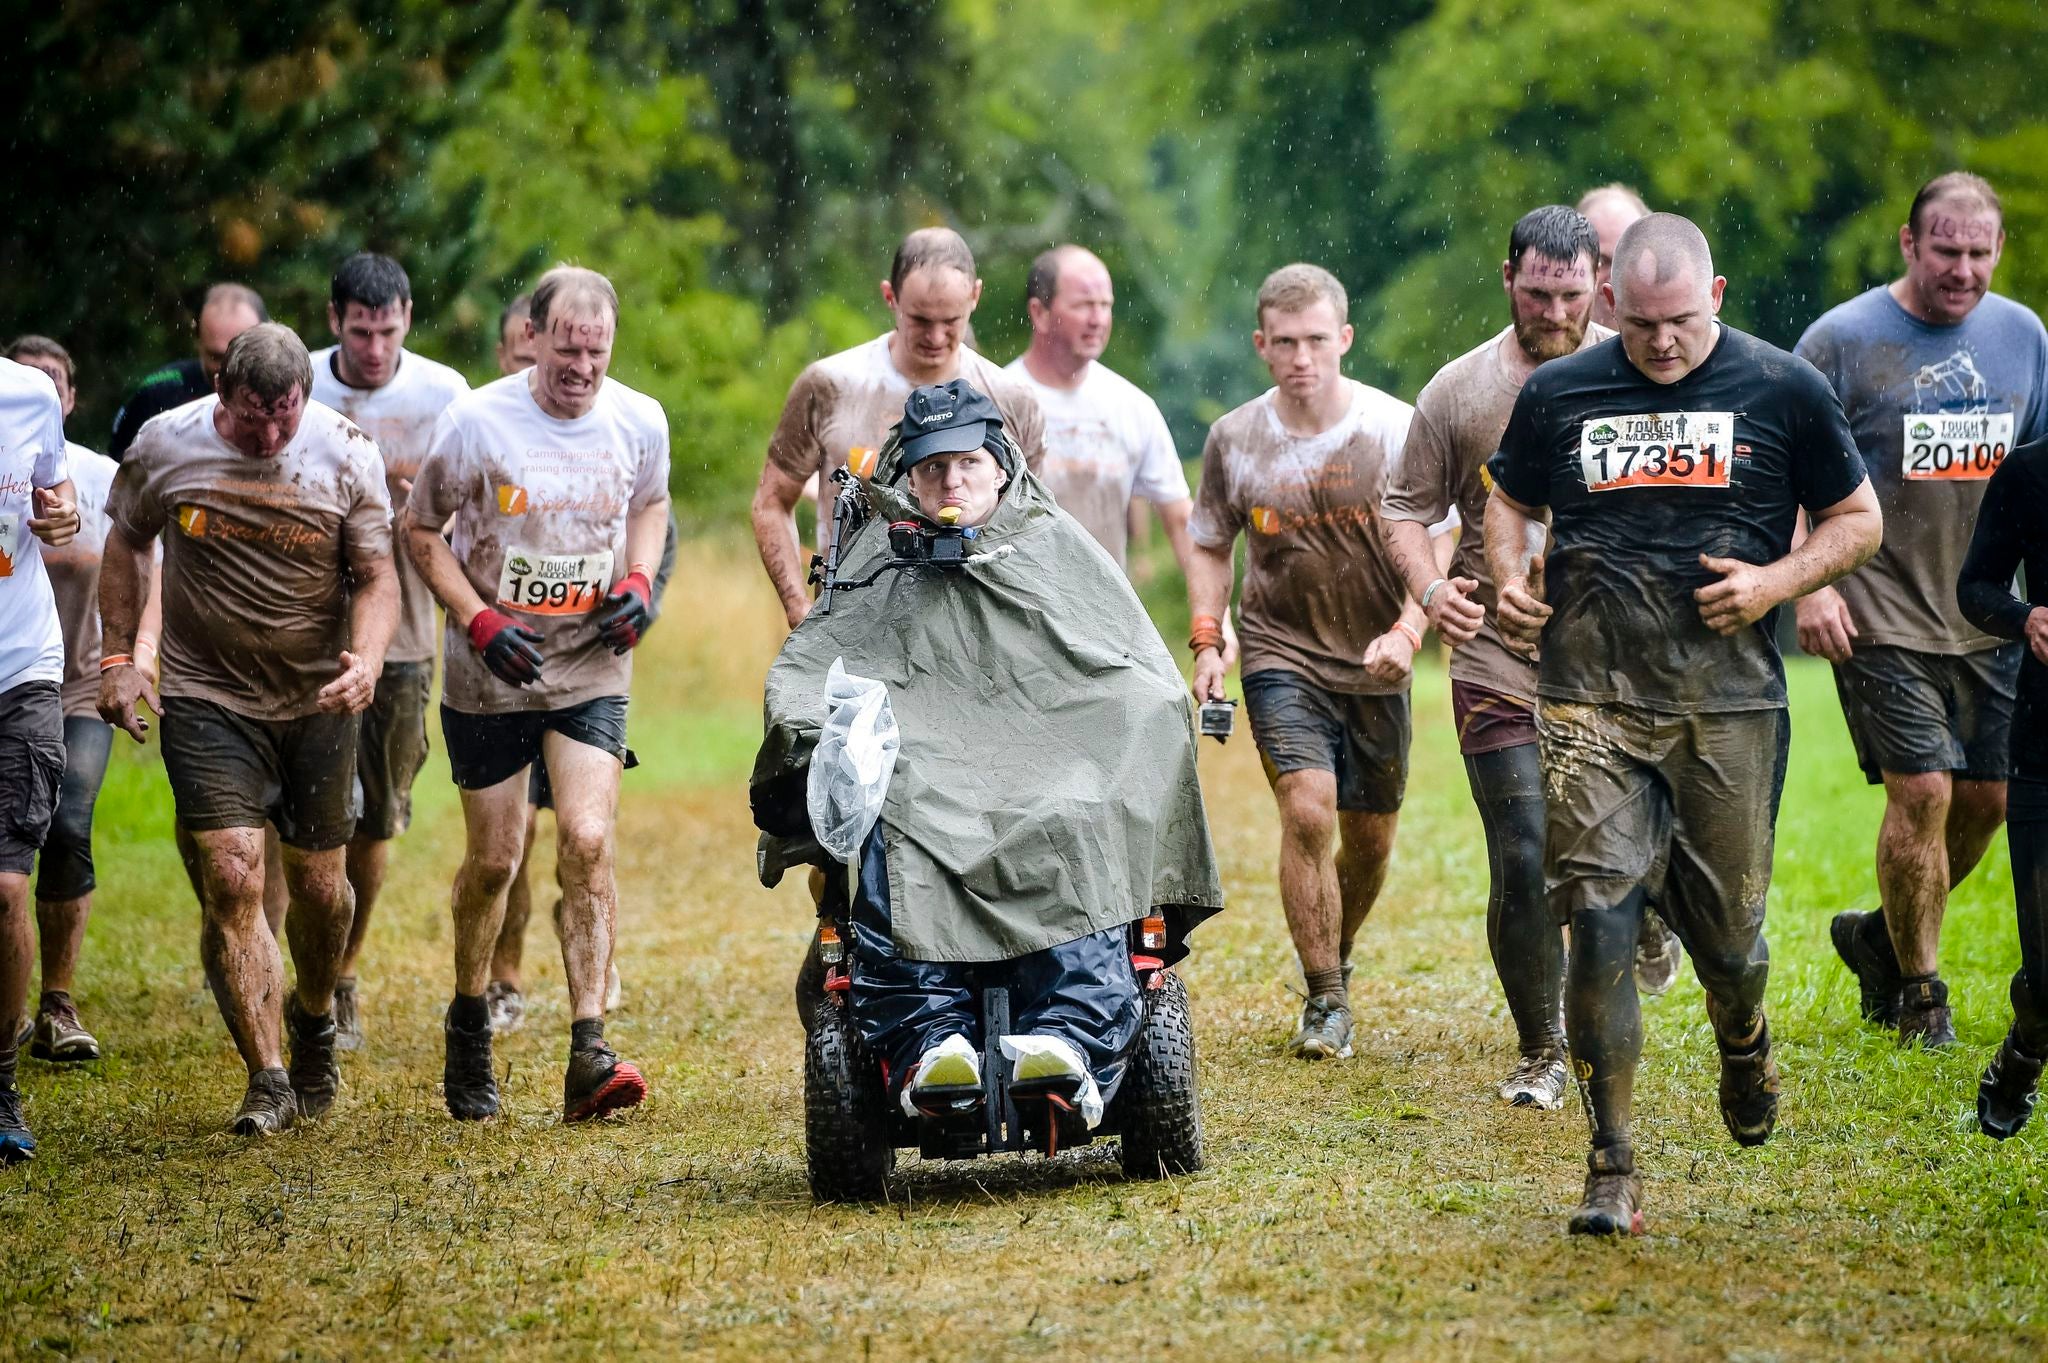 Rob Camm becomes the first tetraplegic to complete the Tough Mudder event